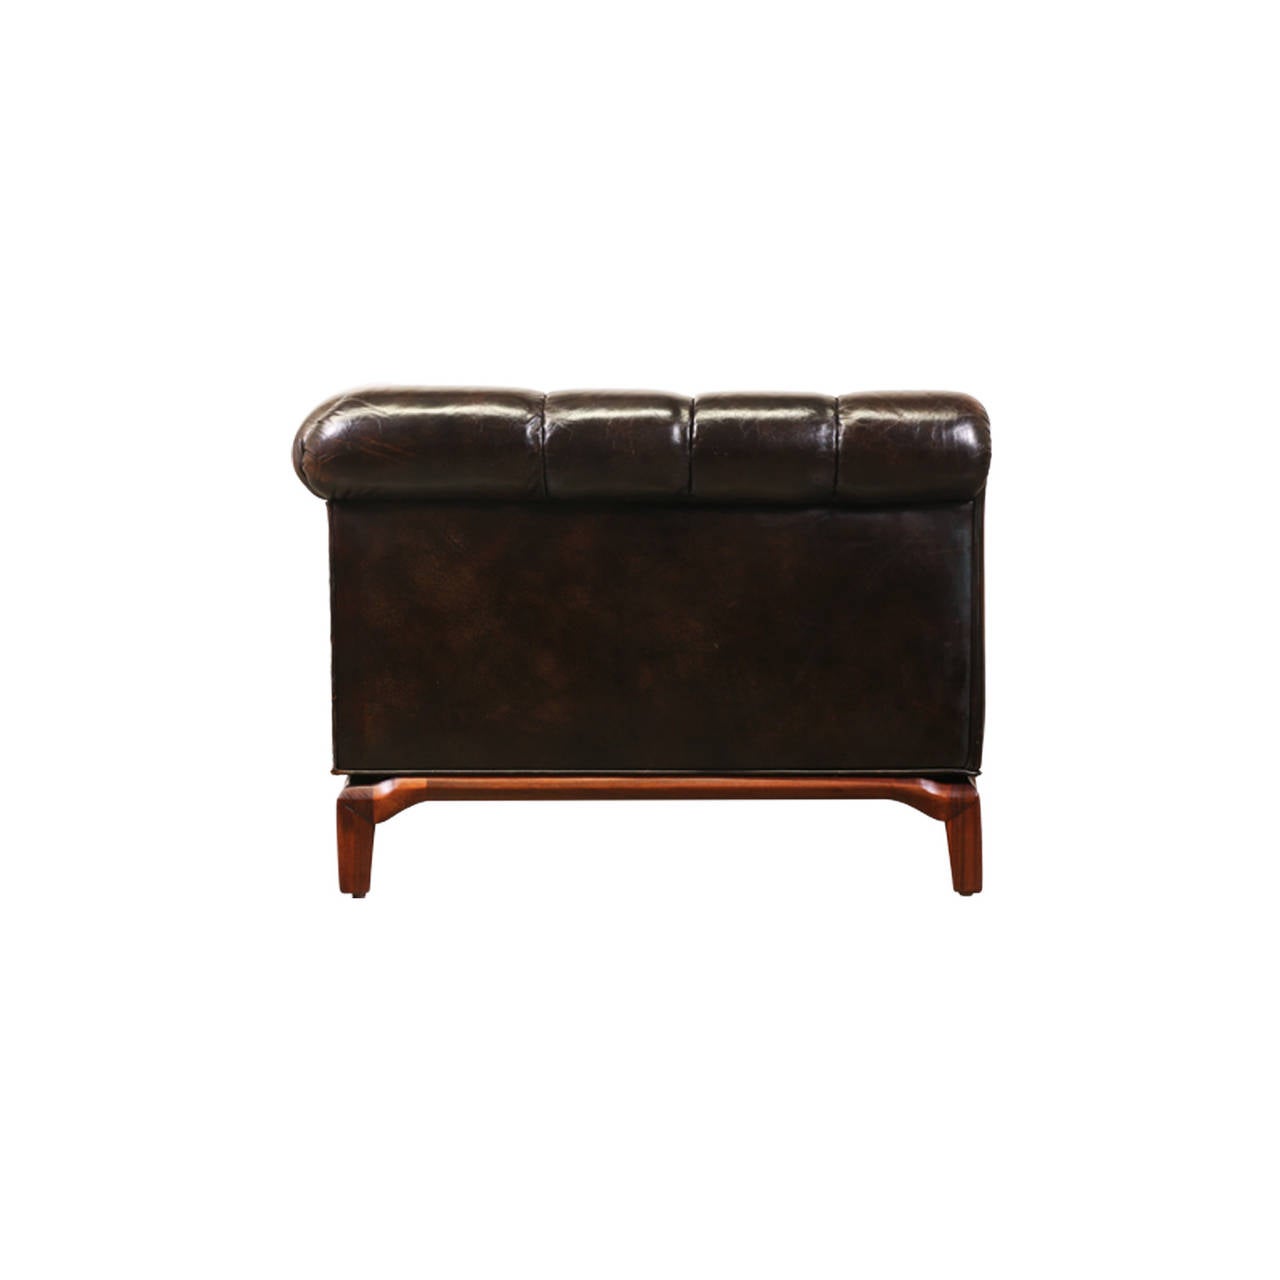 Maurice Bailey Biscuit Tufted Leather Sofa for Monteverdi-Young 1